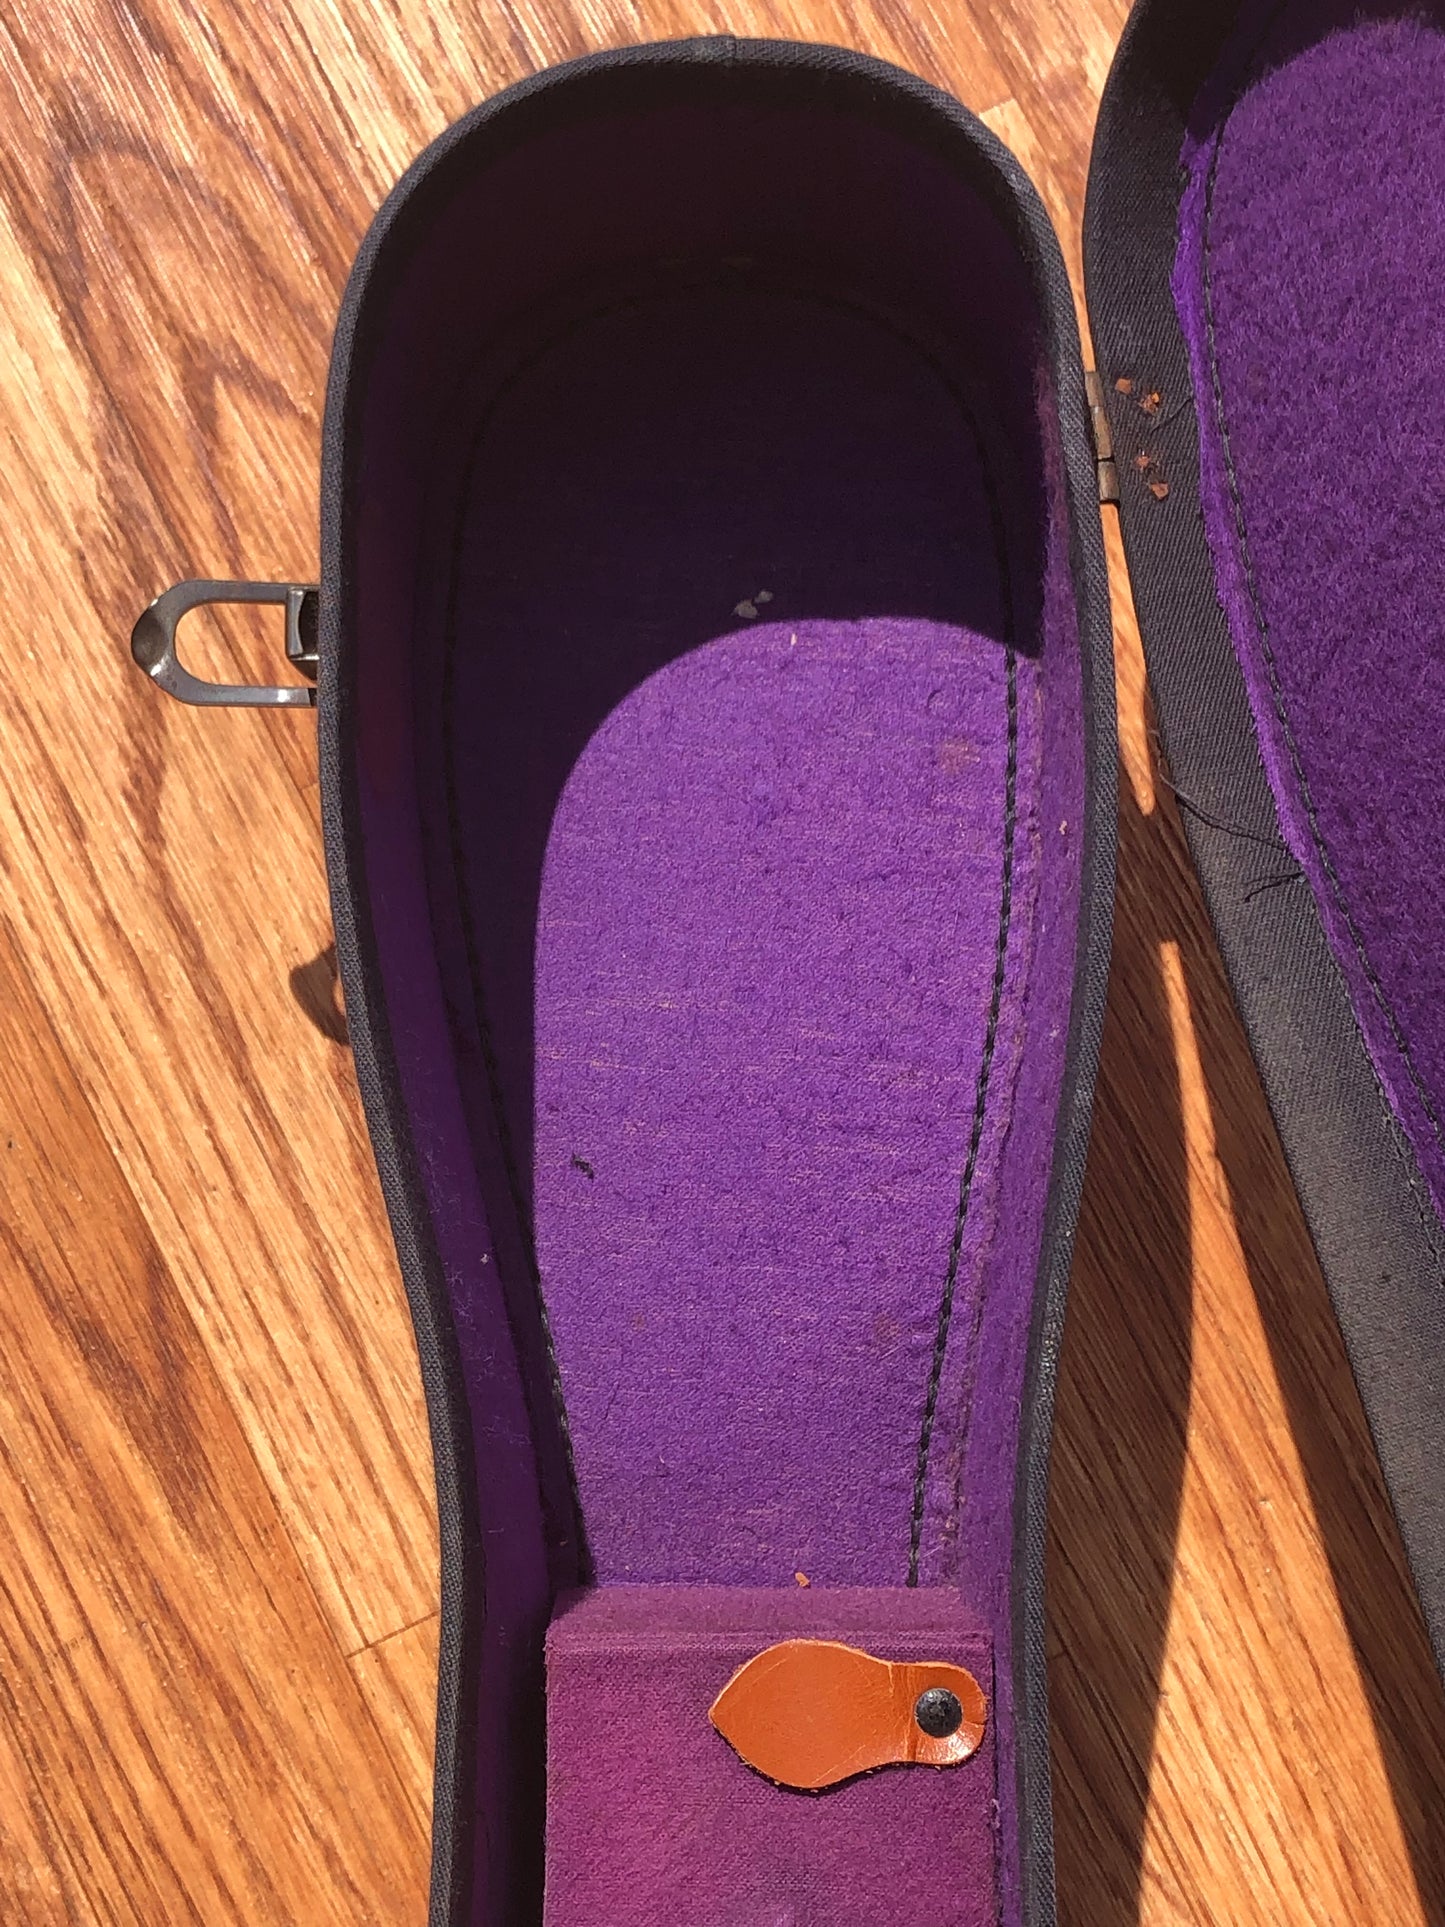 Vintage 1930s Geib Purple Liner Parlor Acoustic Guitar Case Grey for Gibson, Kay, Others